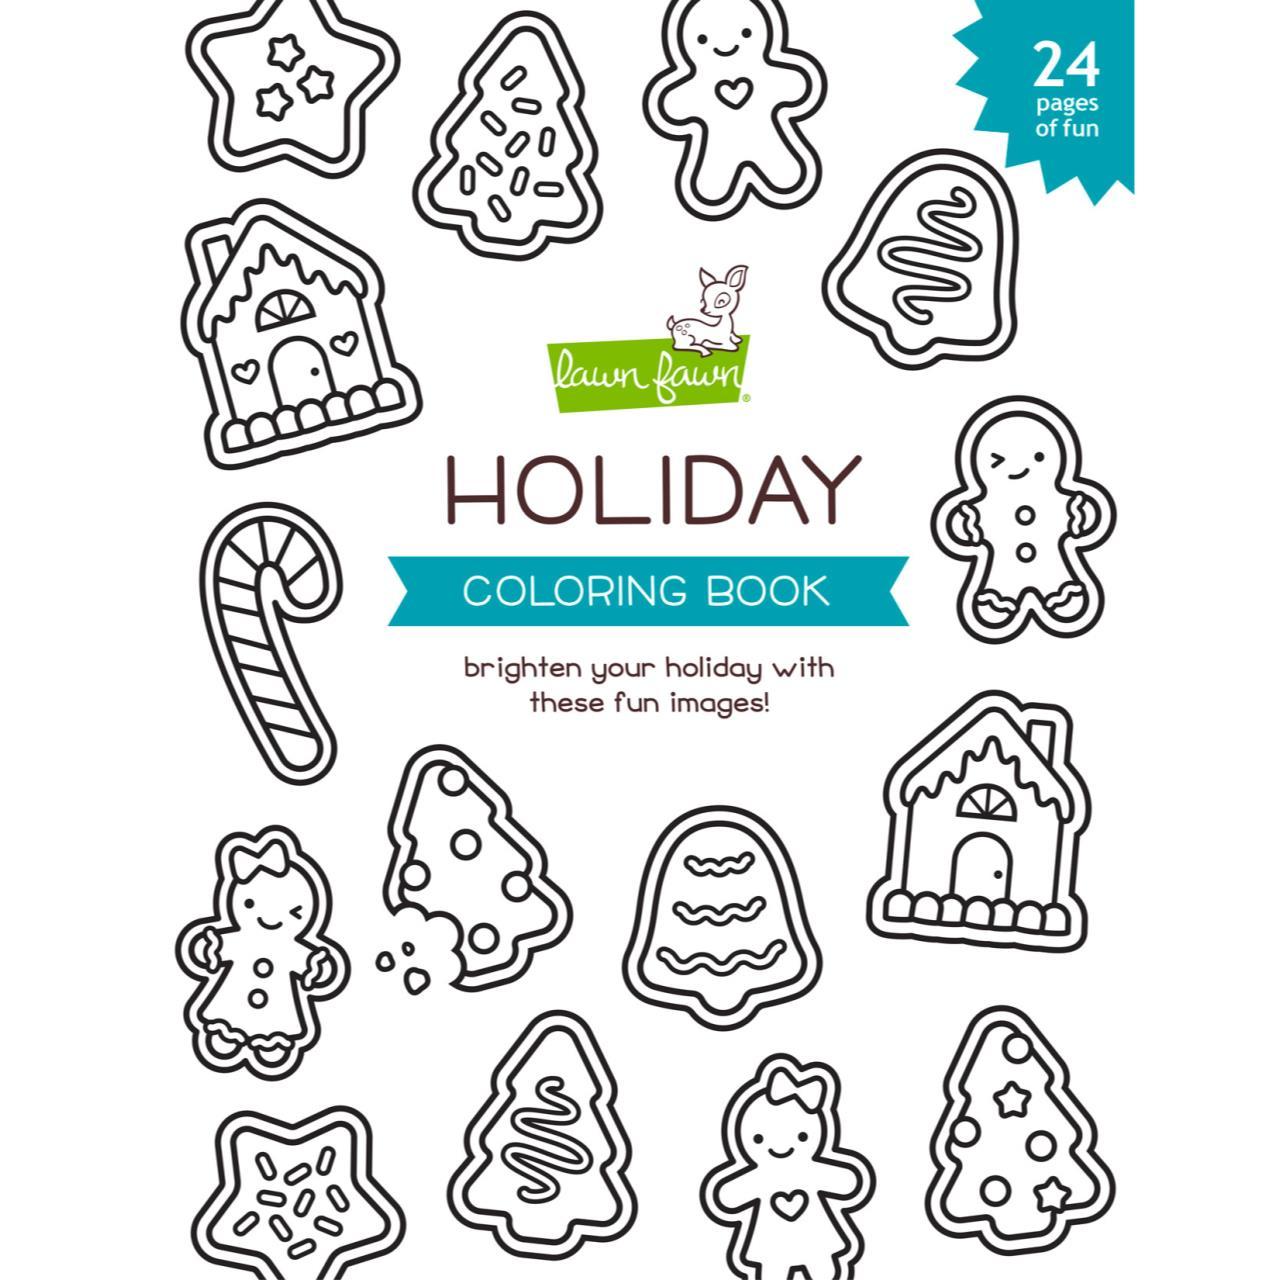 Lawn Fawn Holiday Coloring Book